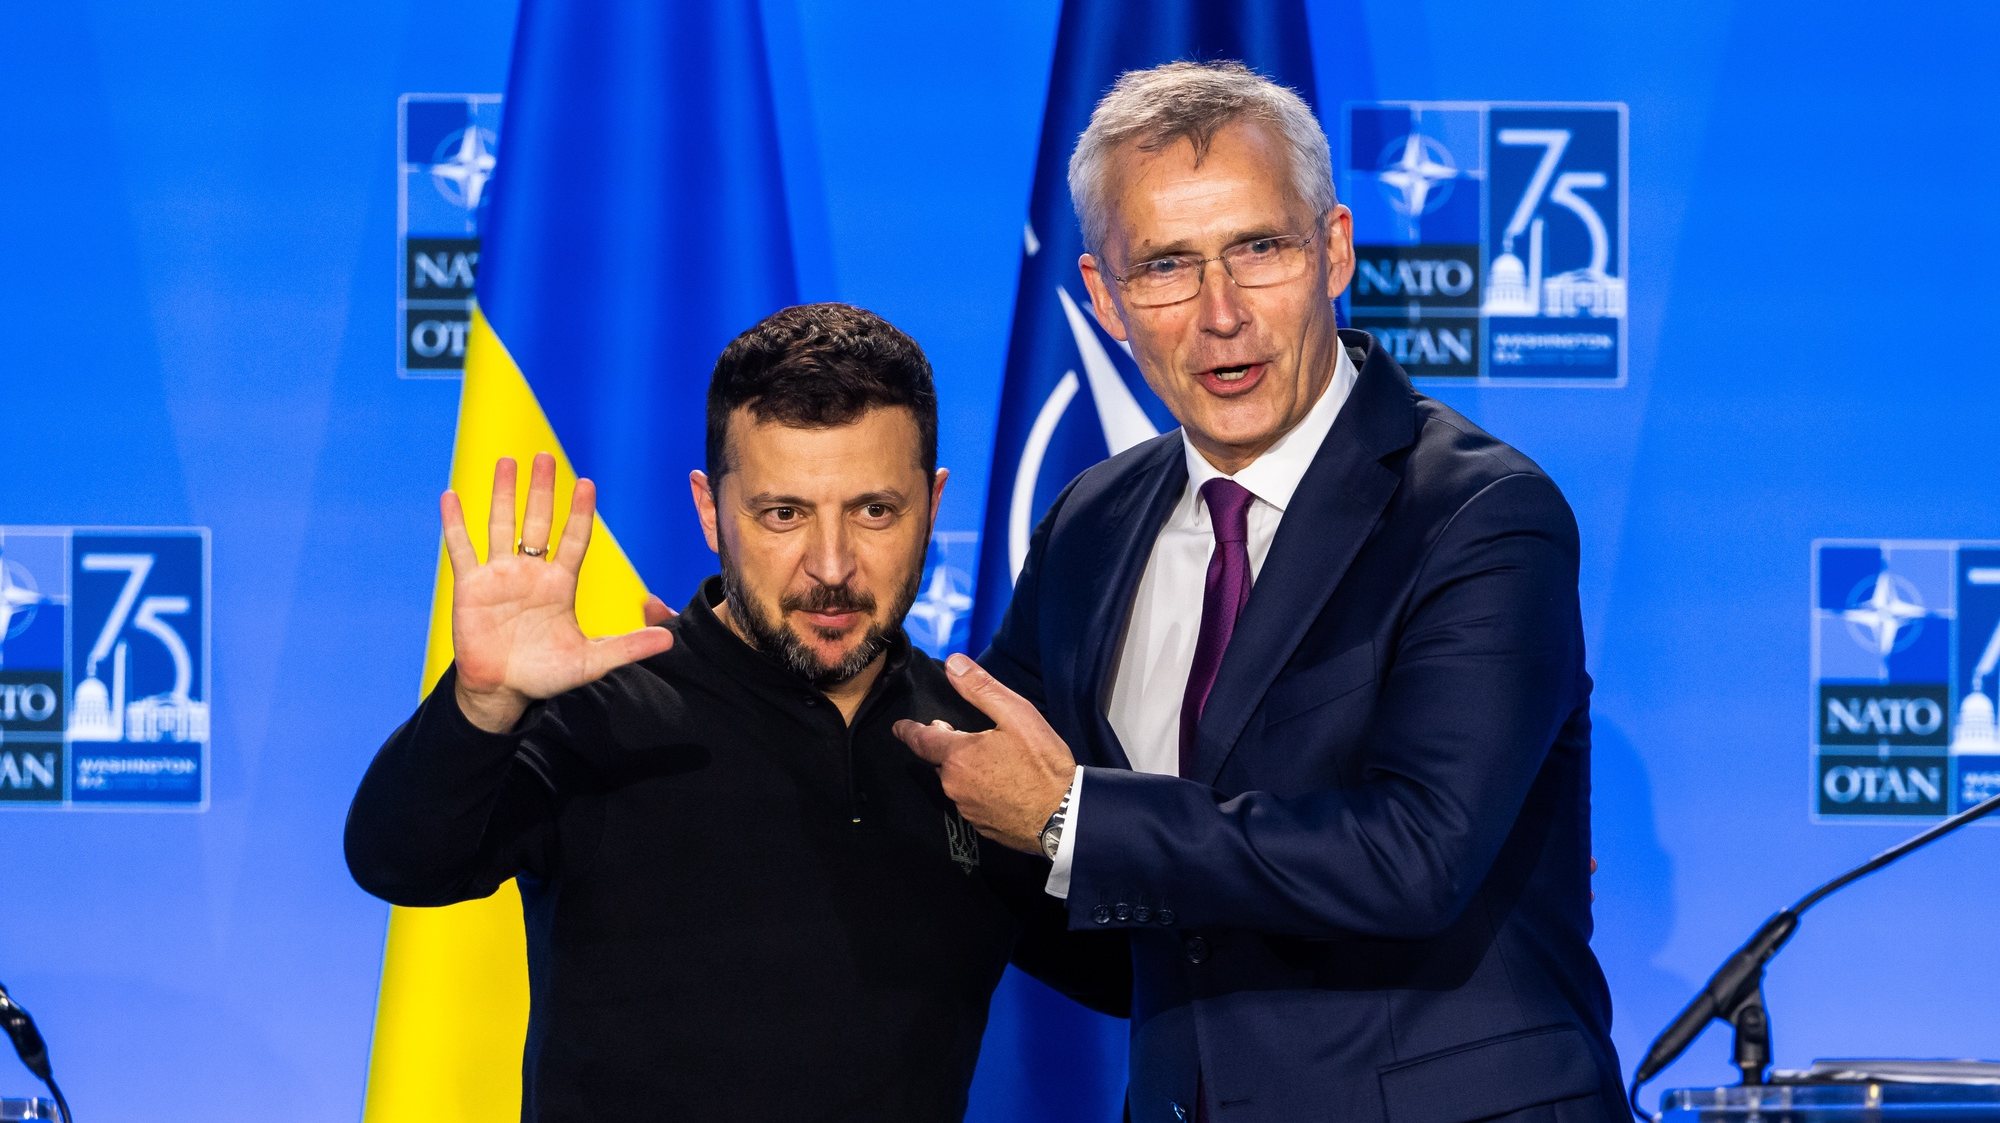 epa11473085 President of Ukraine Volodymyr Zelensky (L) hugs NATO Secretary General Jens Stoltenberg (R) after the two held a press conference at the 2024 North Atlantic Treaty Organization (NATO) conference in Washington, DC, USA, 11 July 2024. NATO members are using the gathering as an opportunity to project their ongoing support for Ukraine as the country continues to fend off Russian aggression.  EPA/JIM LO SCALZO